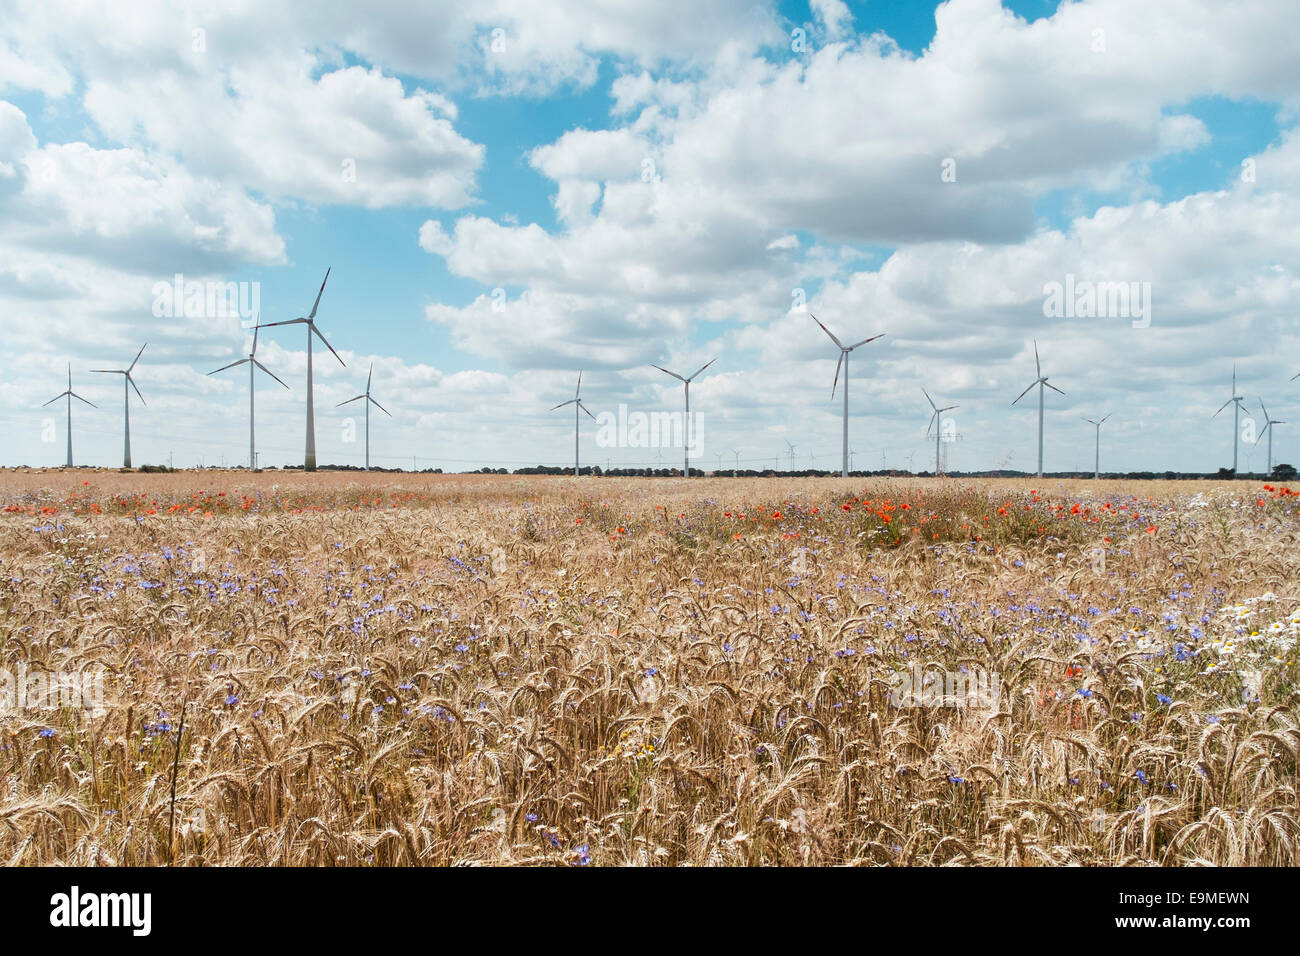 Crops growing in farm against windmills Stock Photo